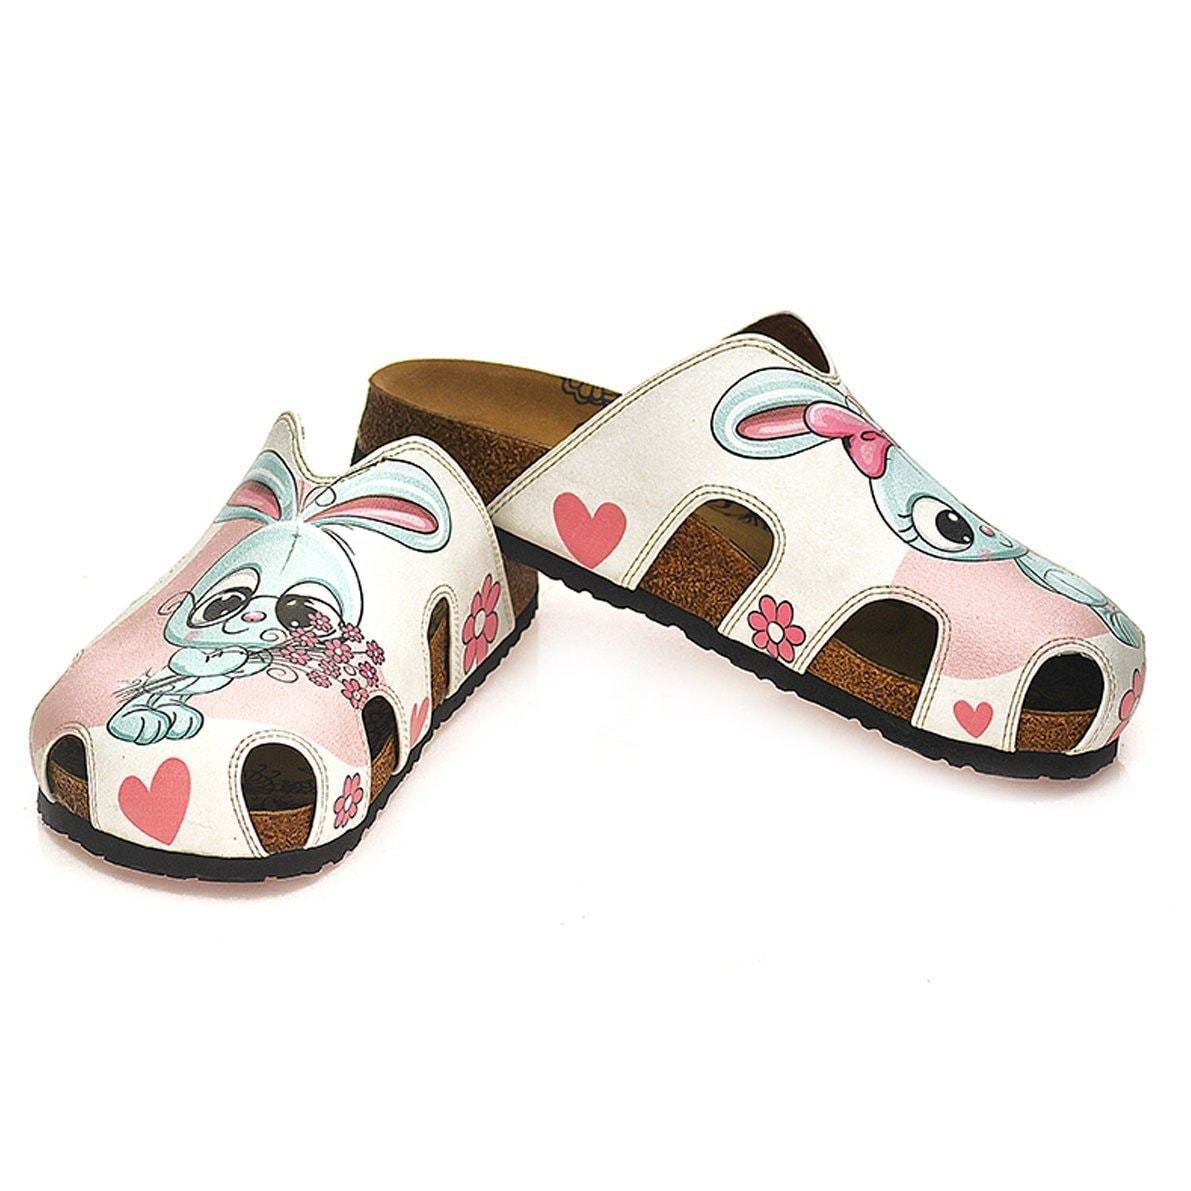 Pink & Gray Bunny Love Clogs WCAL601 (737670004832)